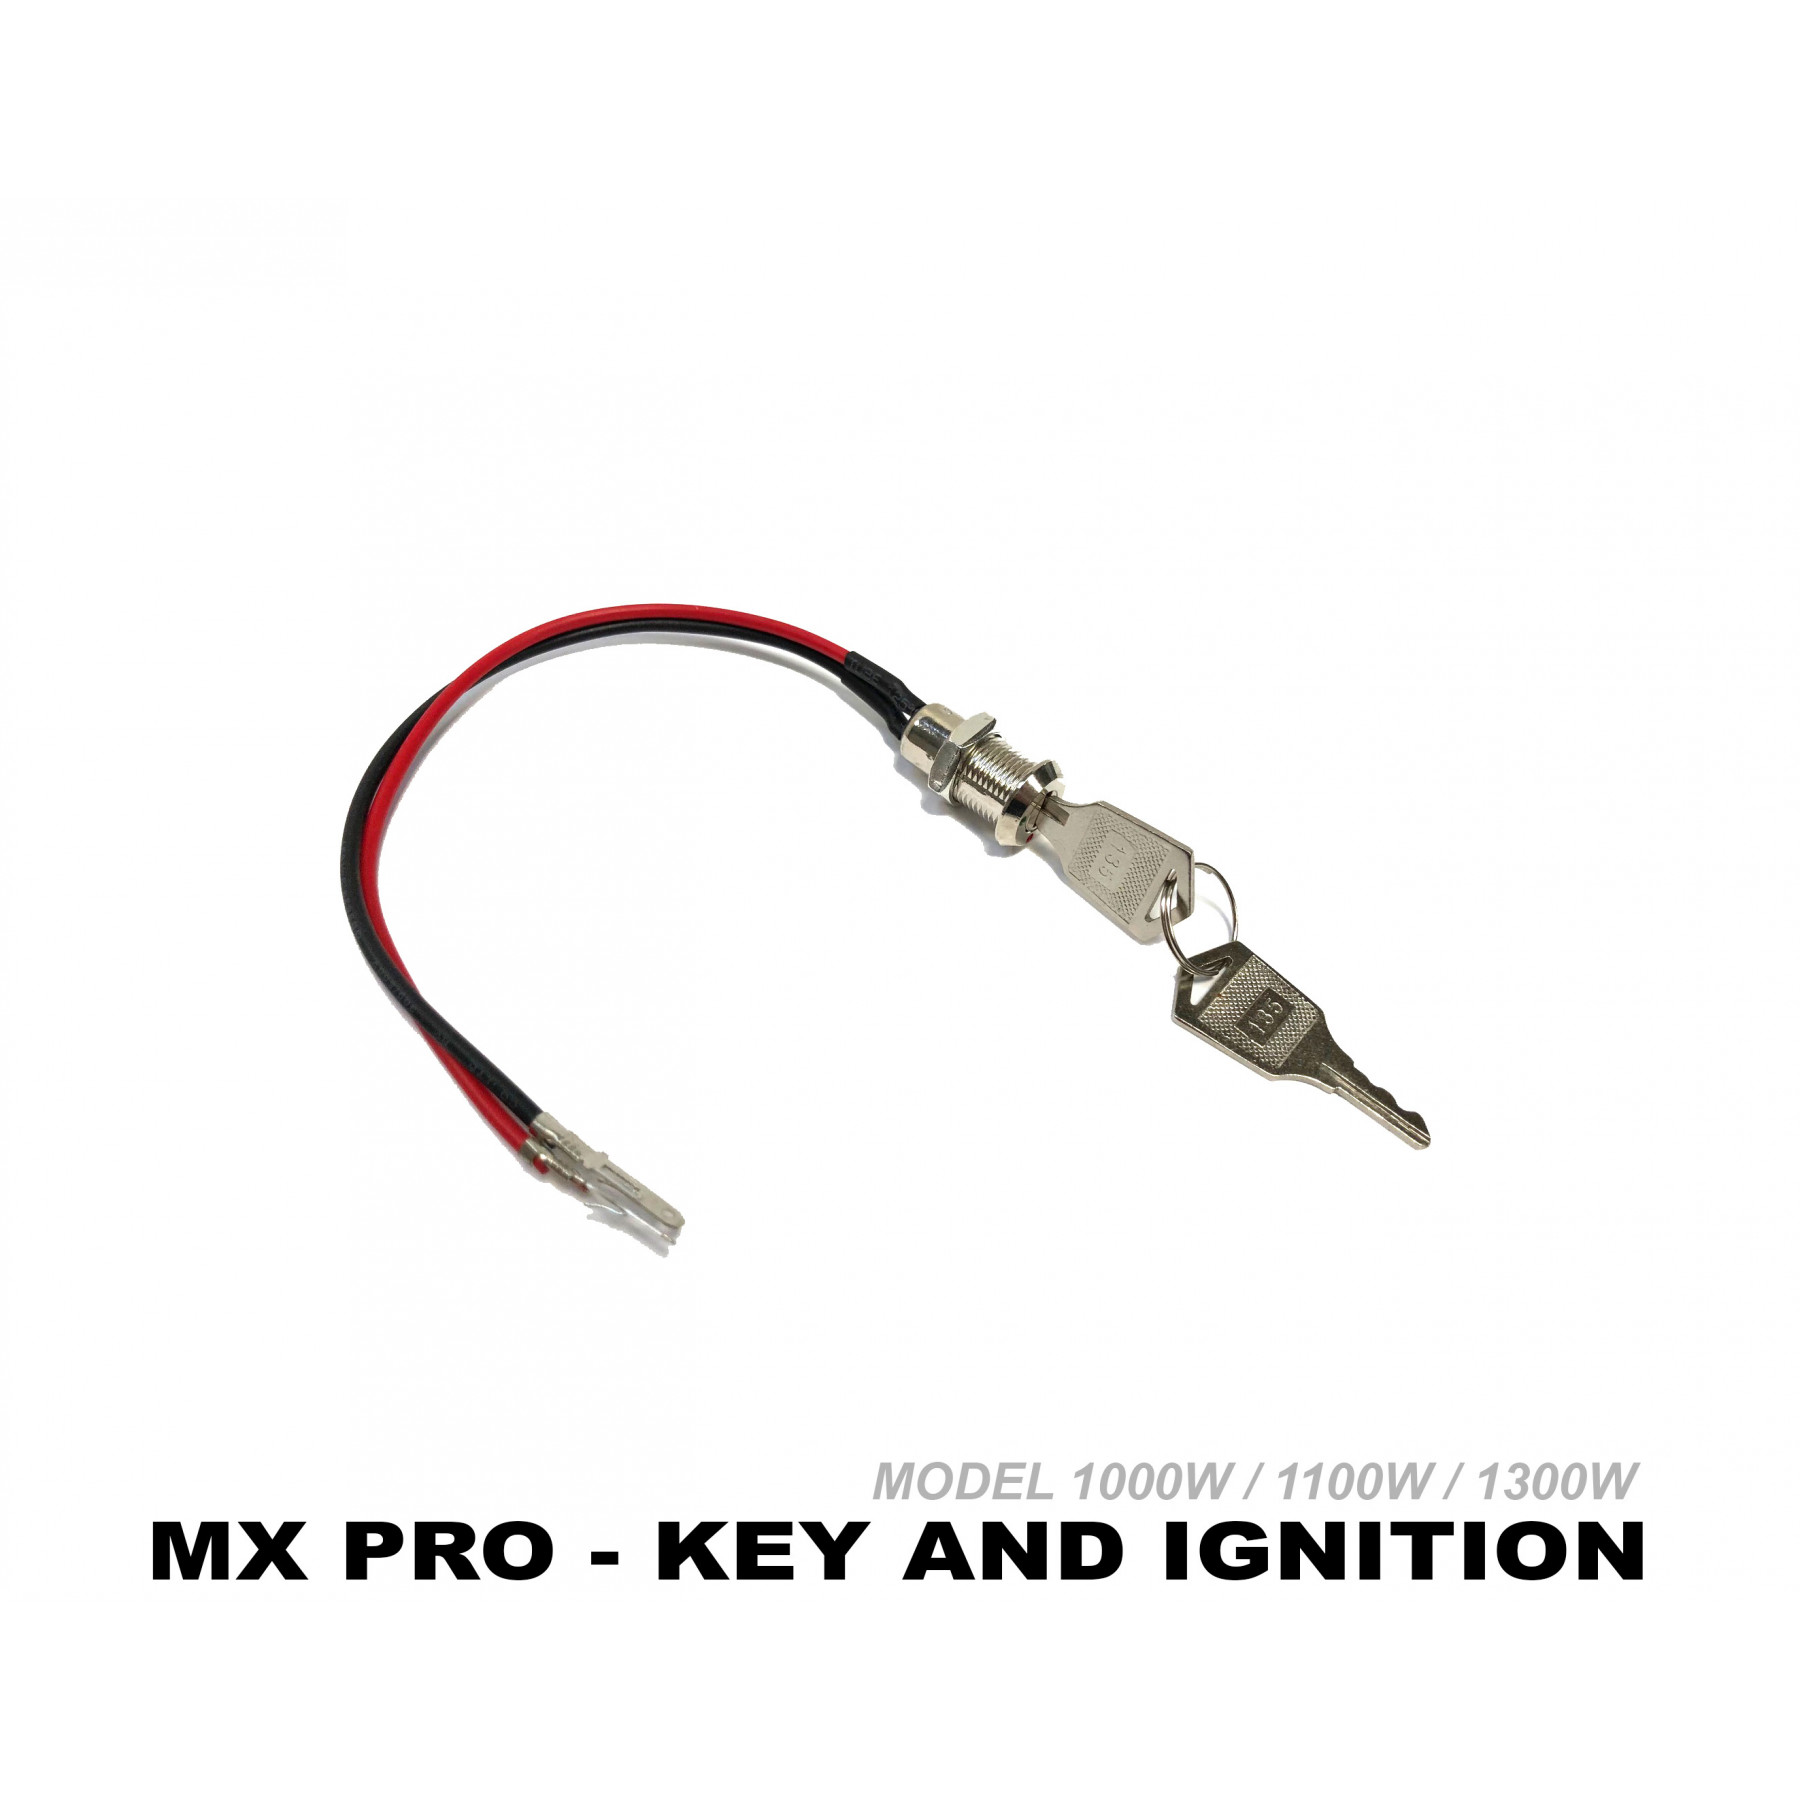 XTREME ELECTRIC XTM MX-PRO 36V REPLACEMENT KEY IGNITION AND KEY